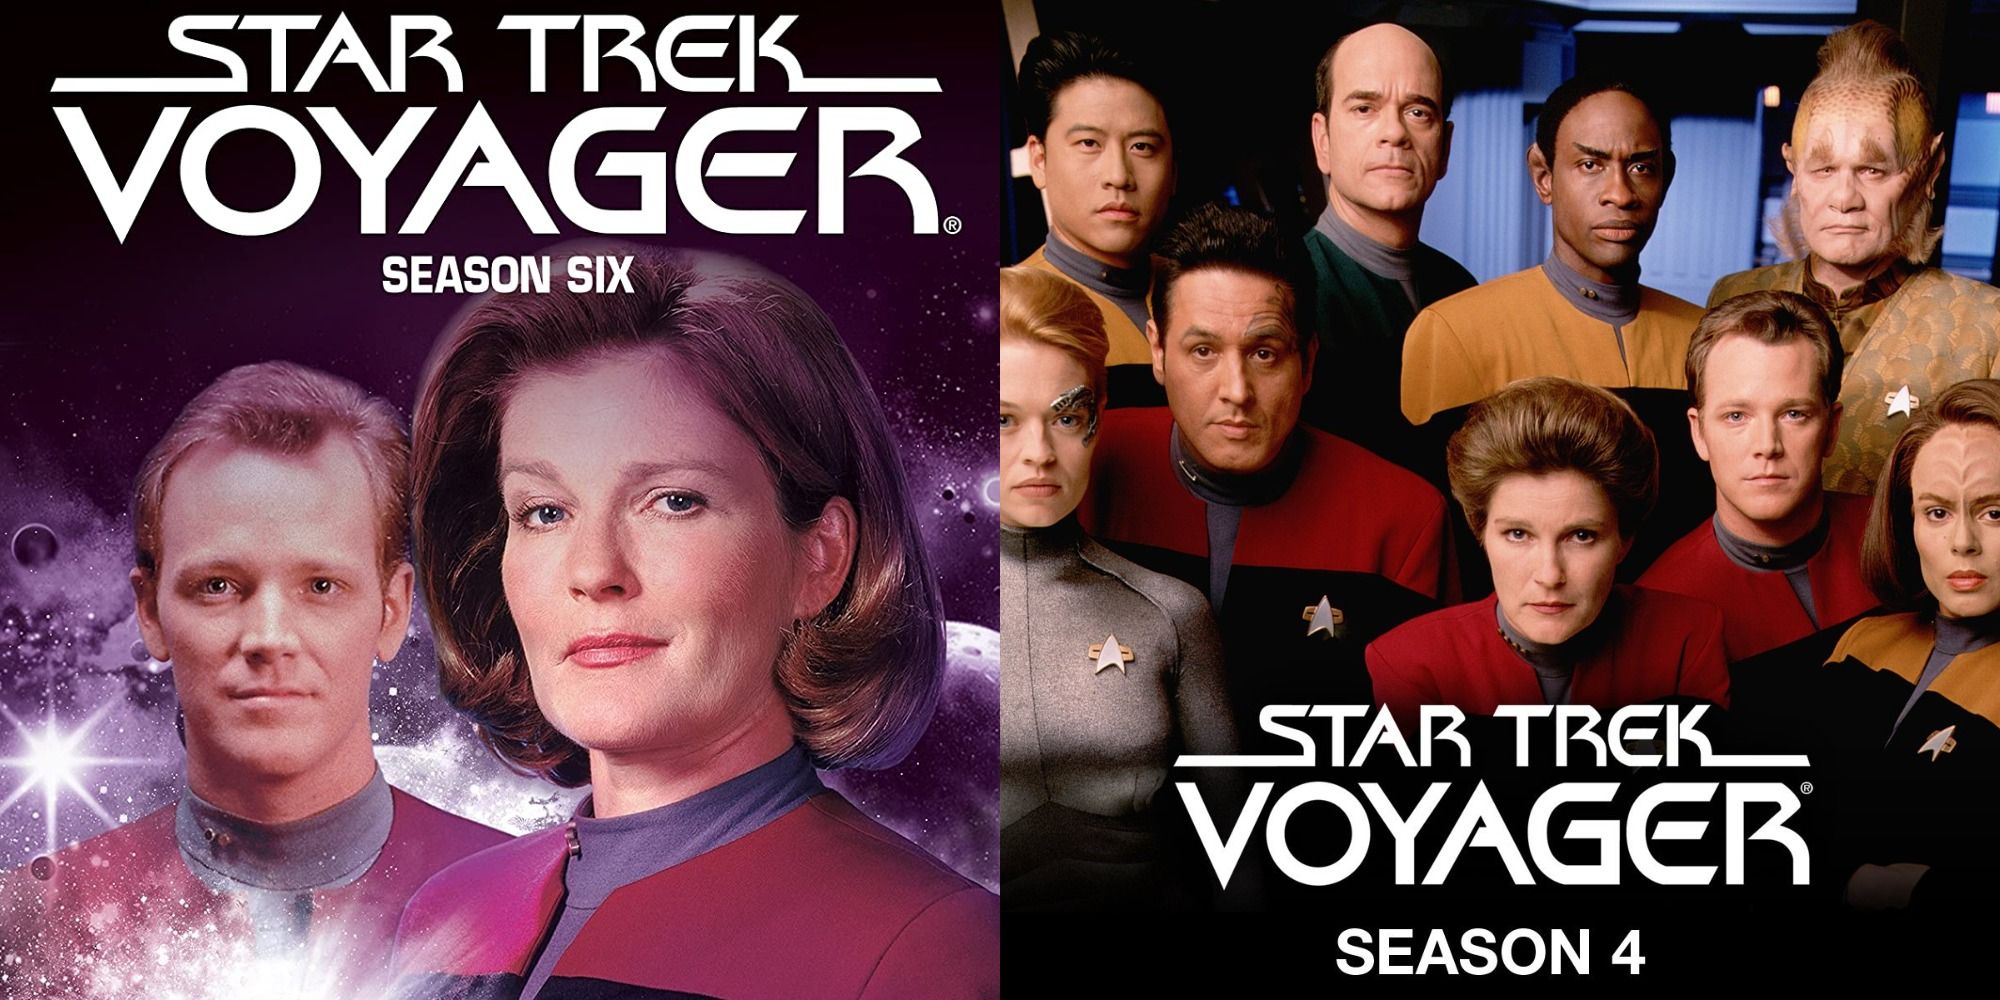 Split image showing the cast of Star Trek Voyager seasons 6 and 4